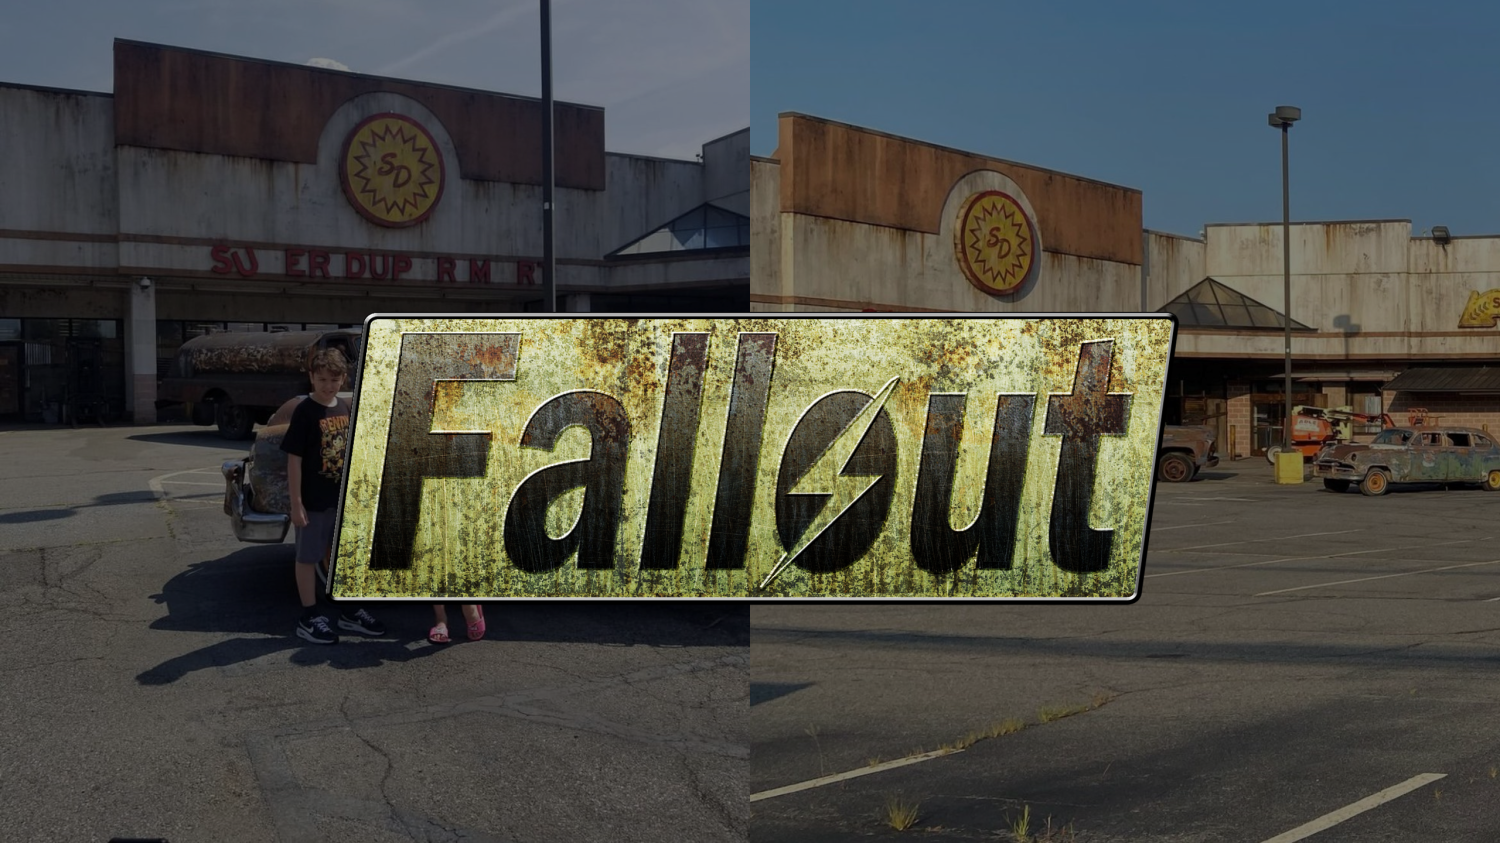 Fallout TV show set photos confirm Amazon is focused on authenticity